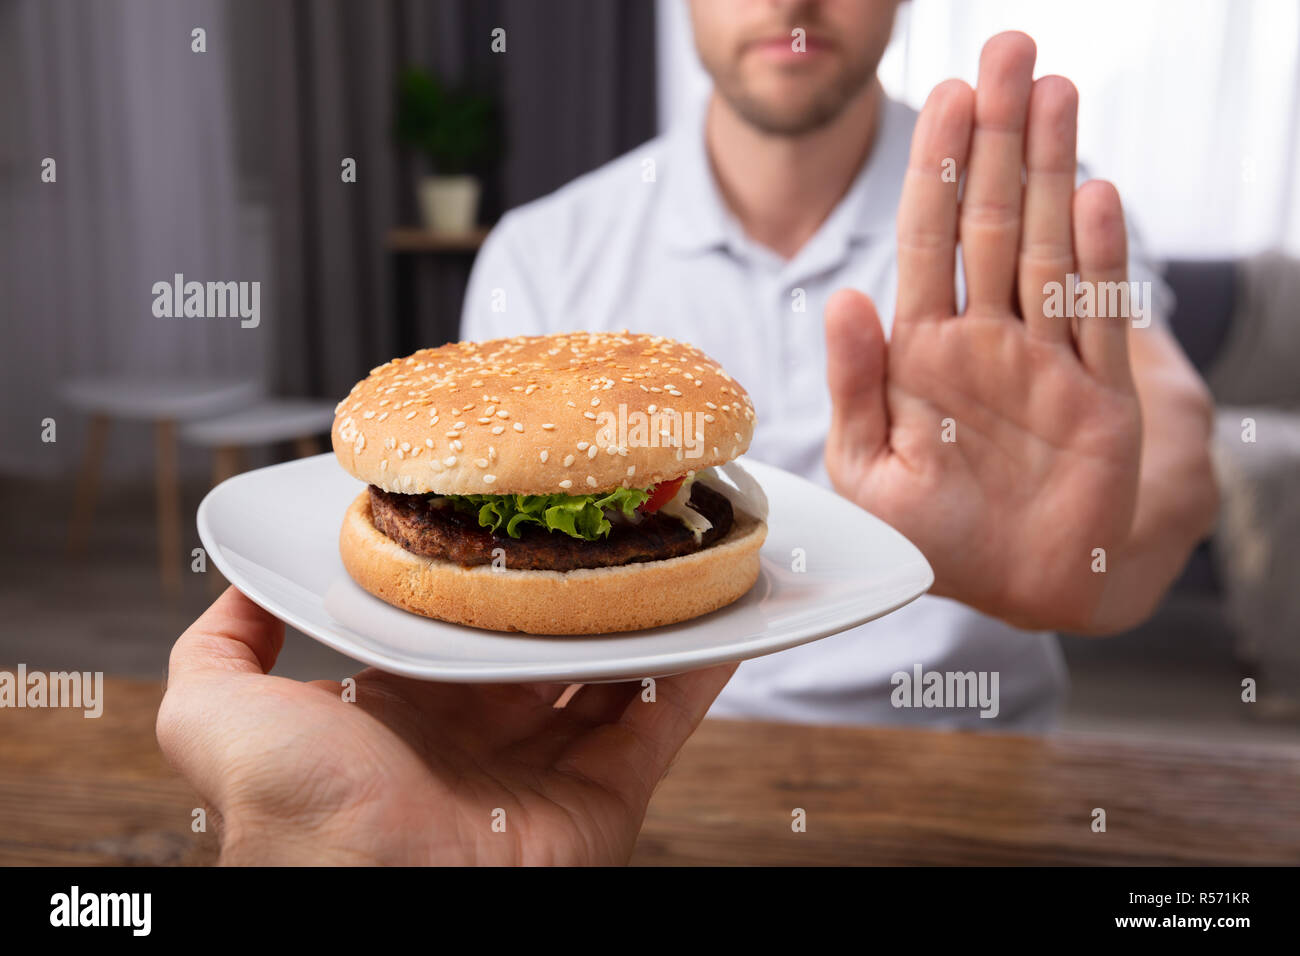 Close-up Of A Man's Hand Refusing Burger Offered By Person Stock Photo